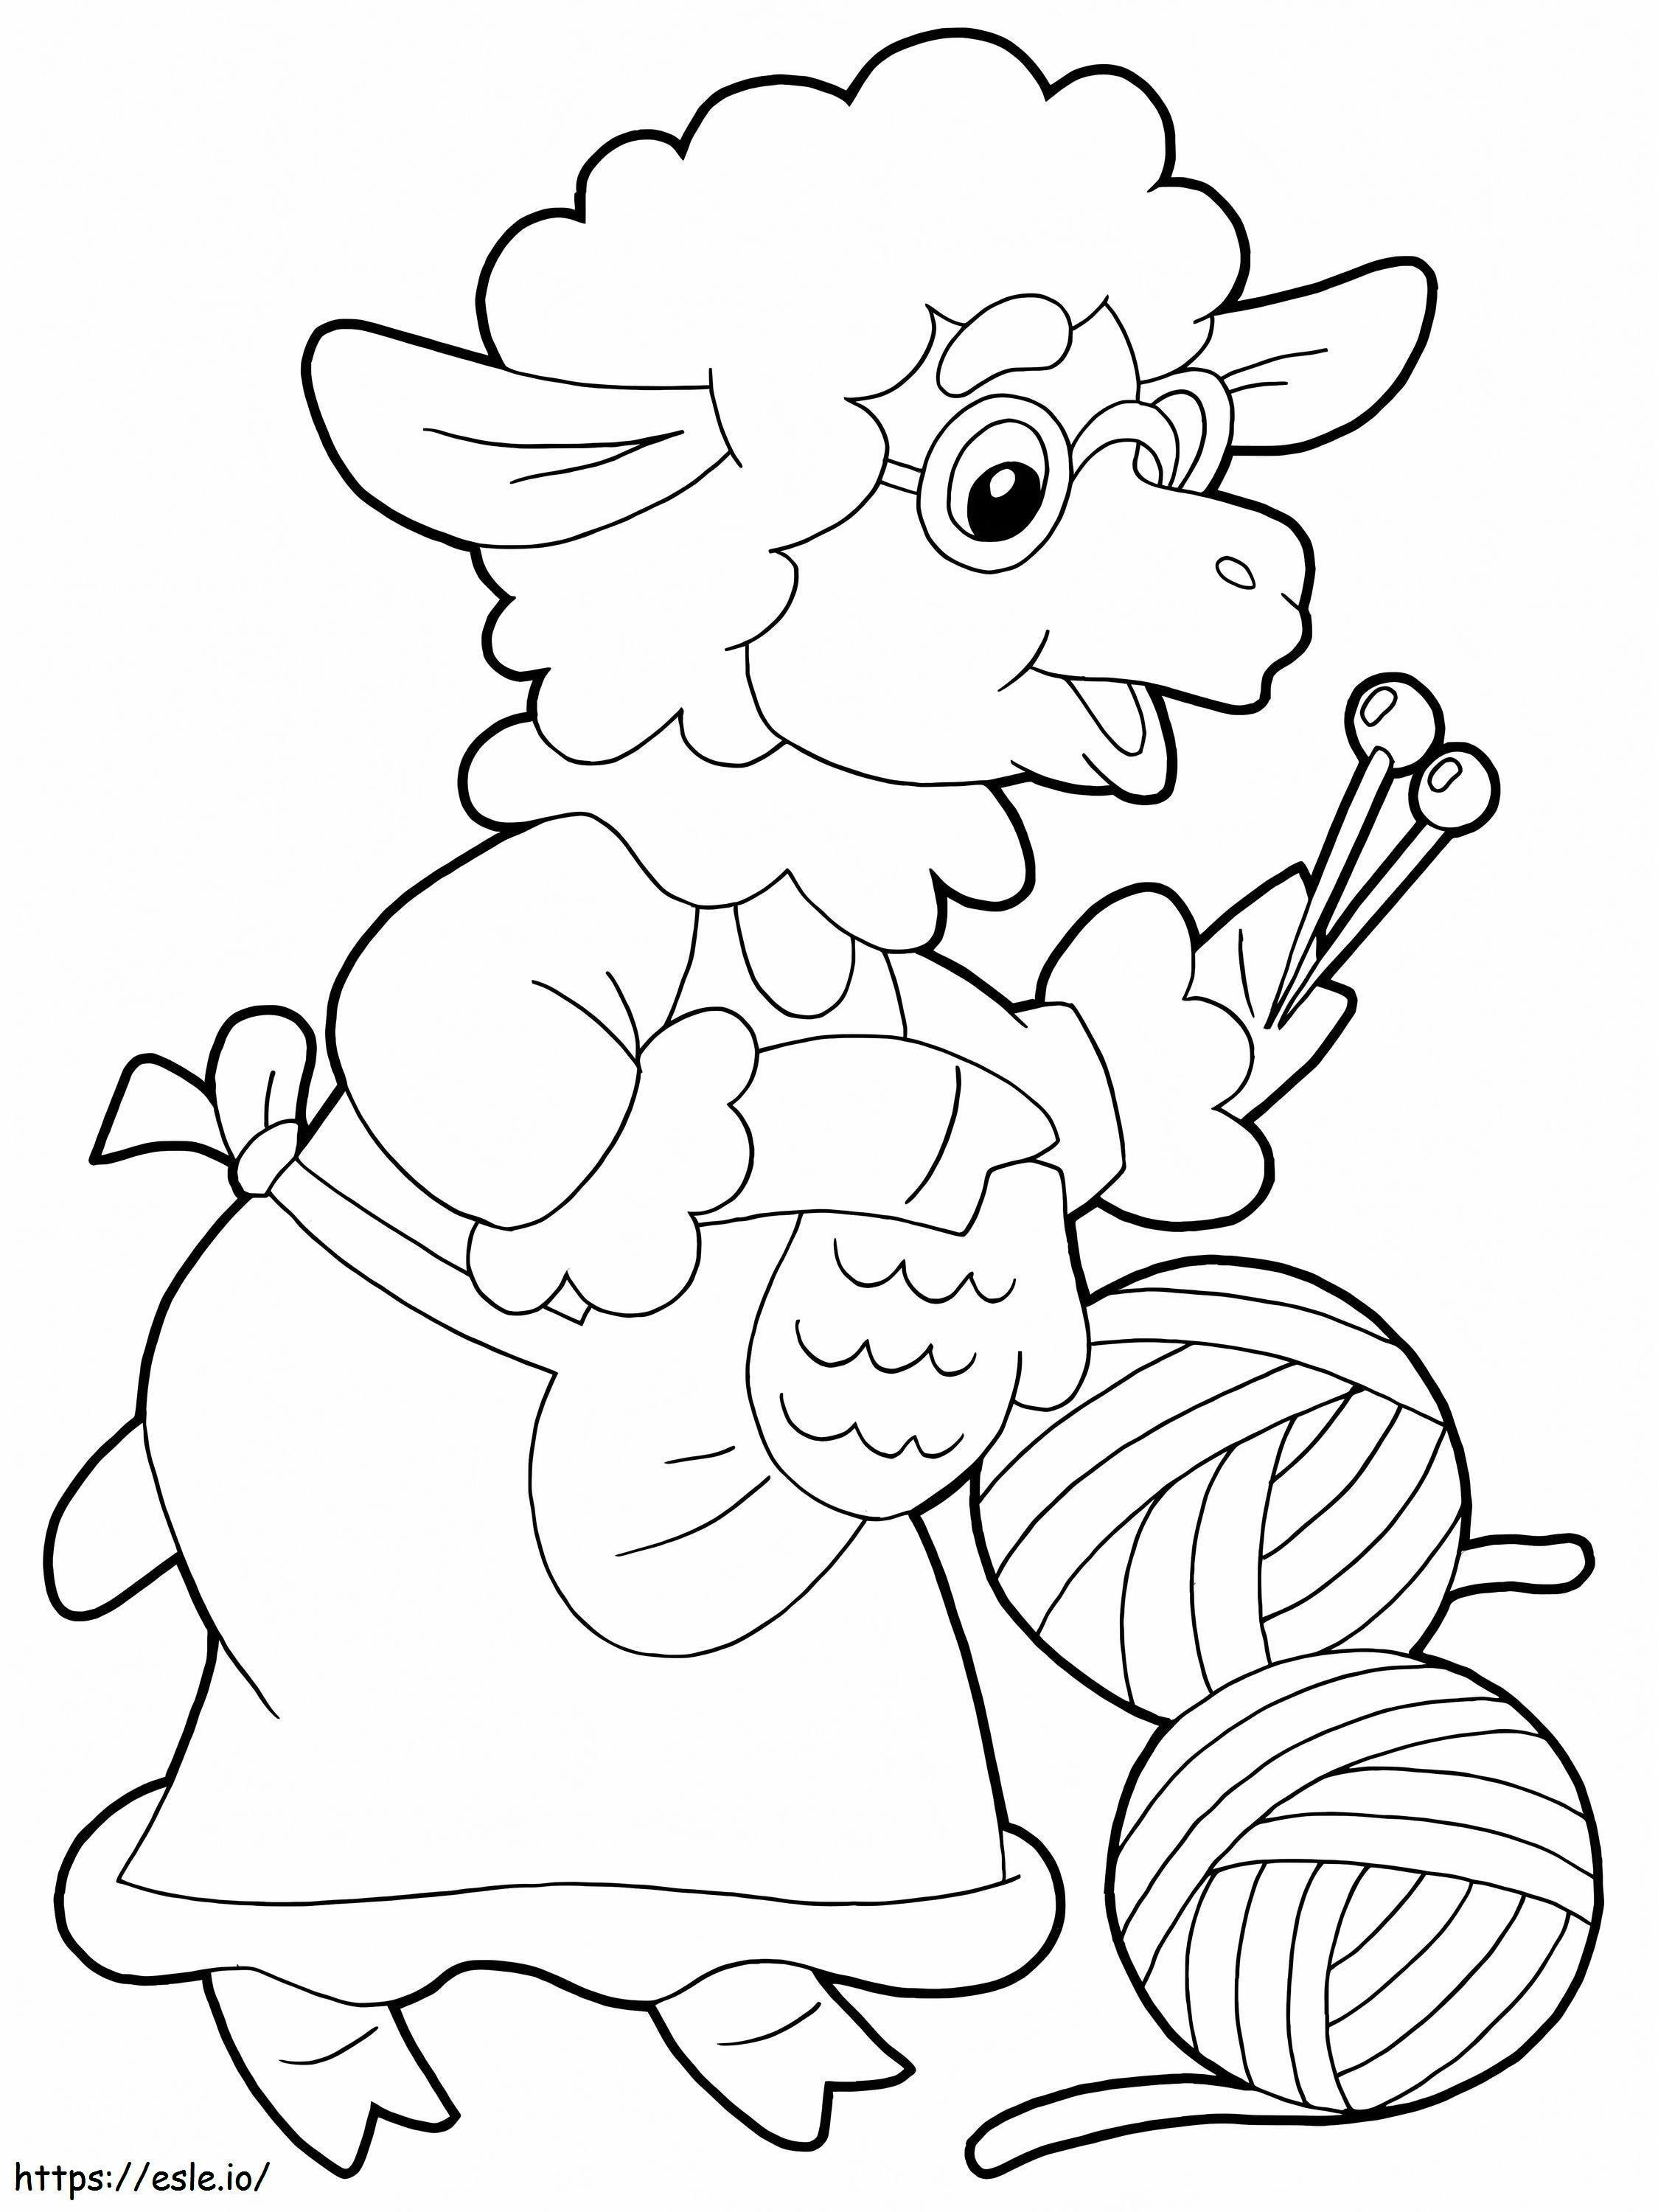 Grandmother Sheep coloring page